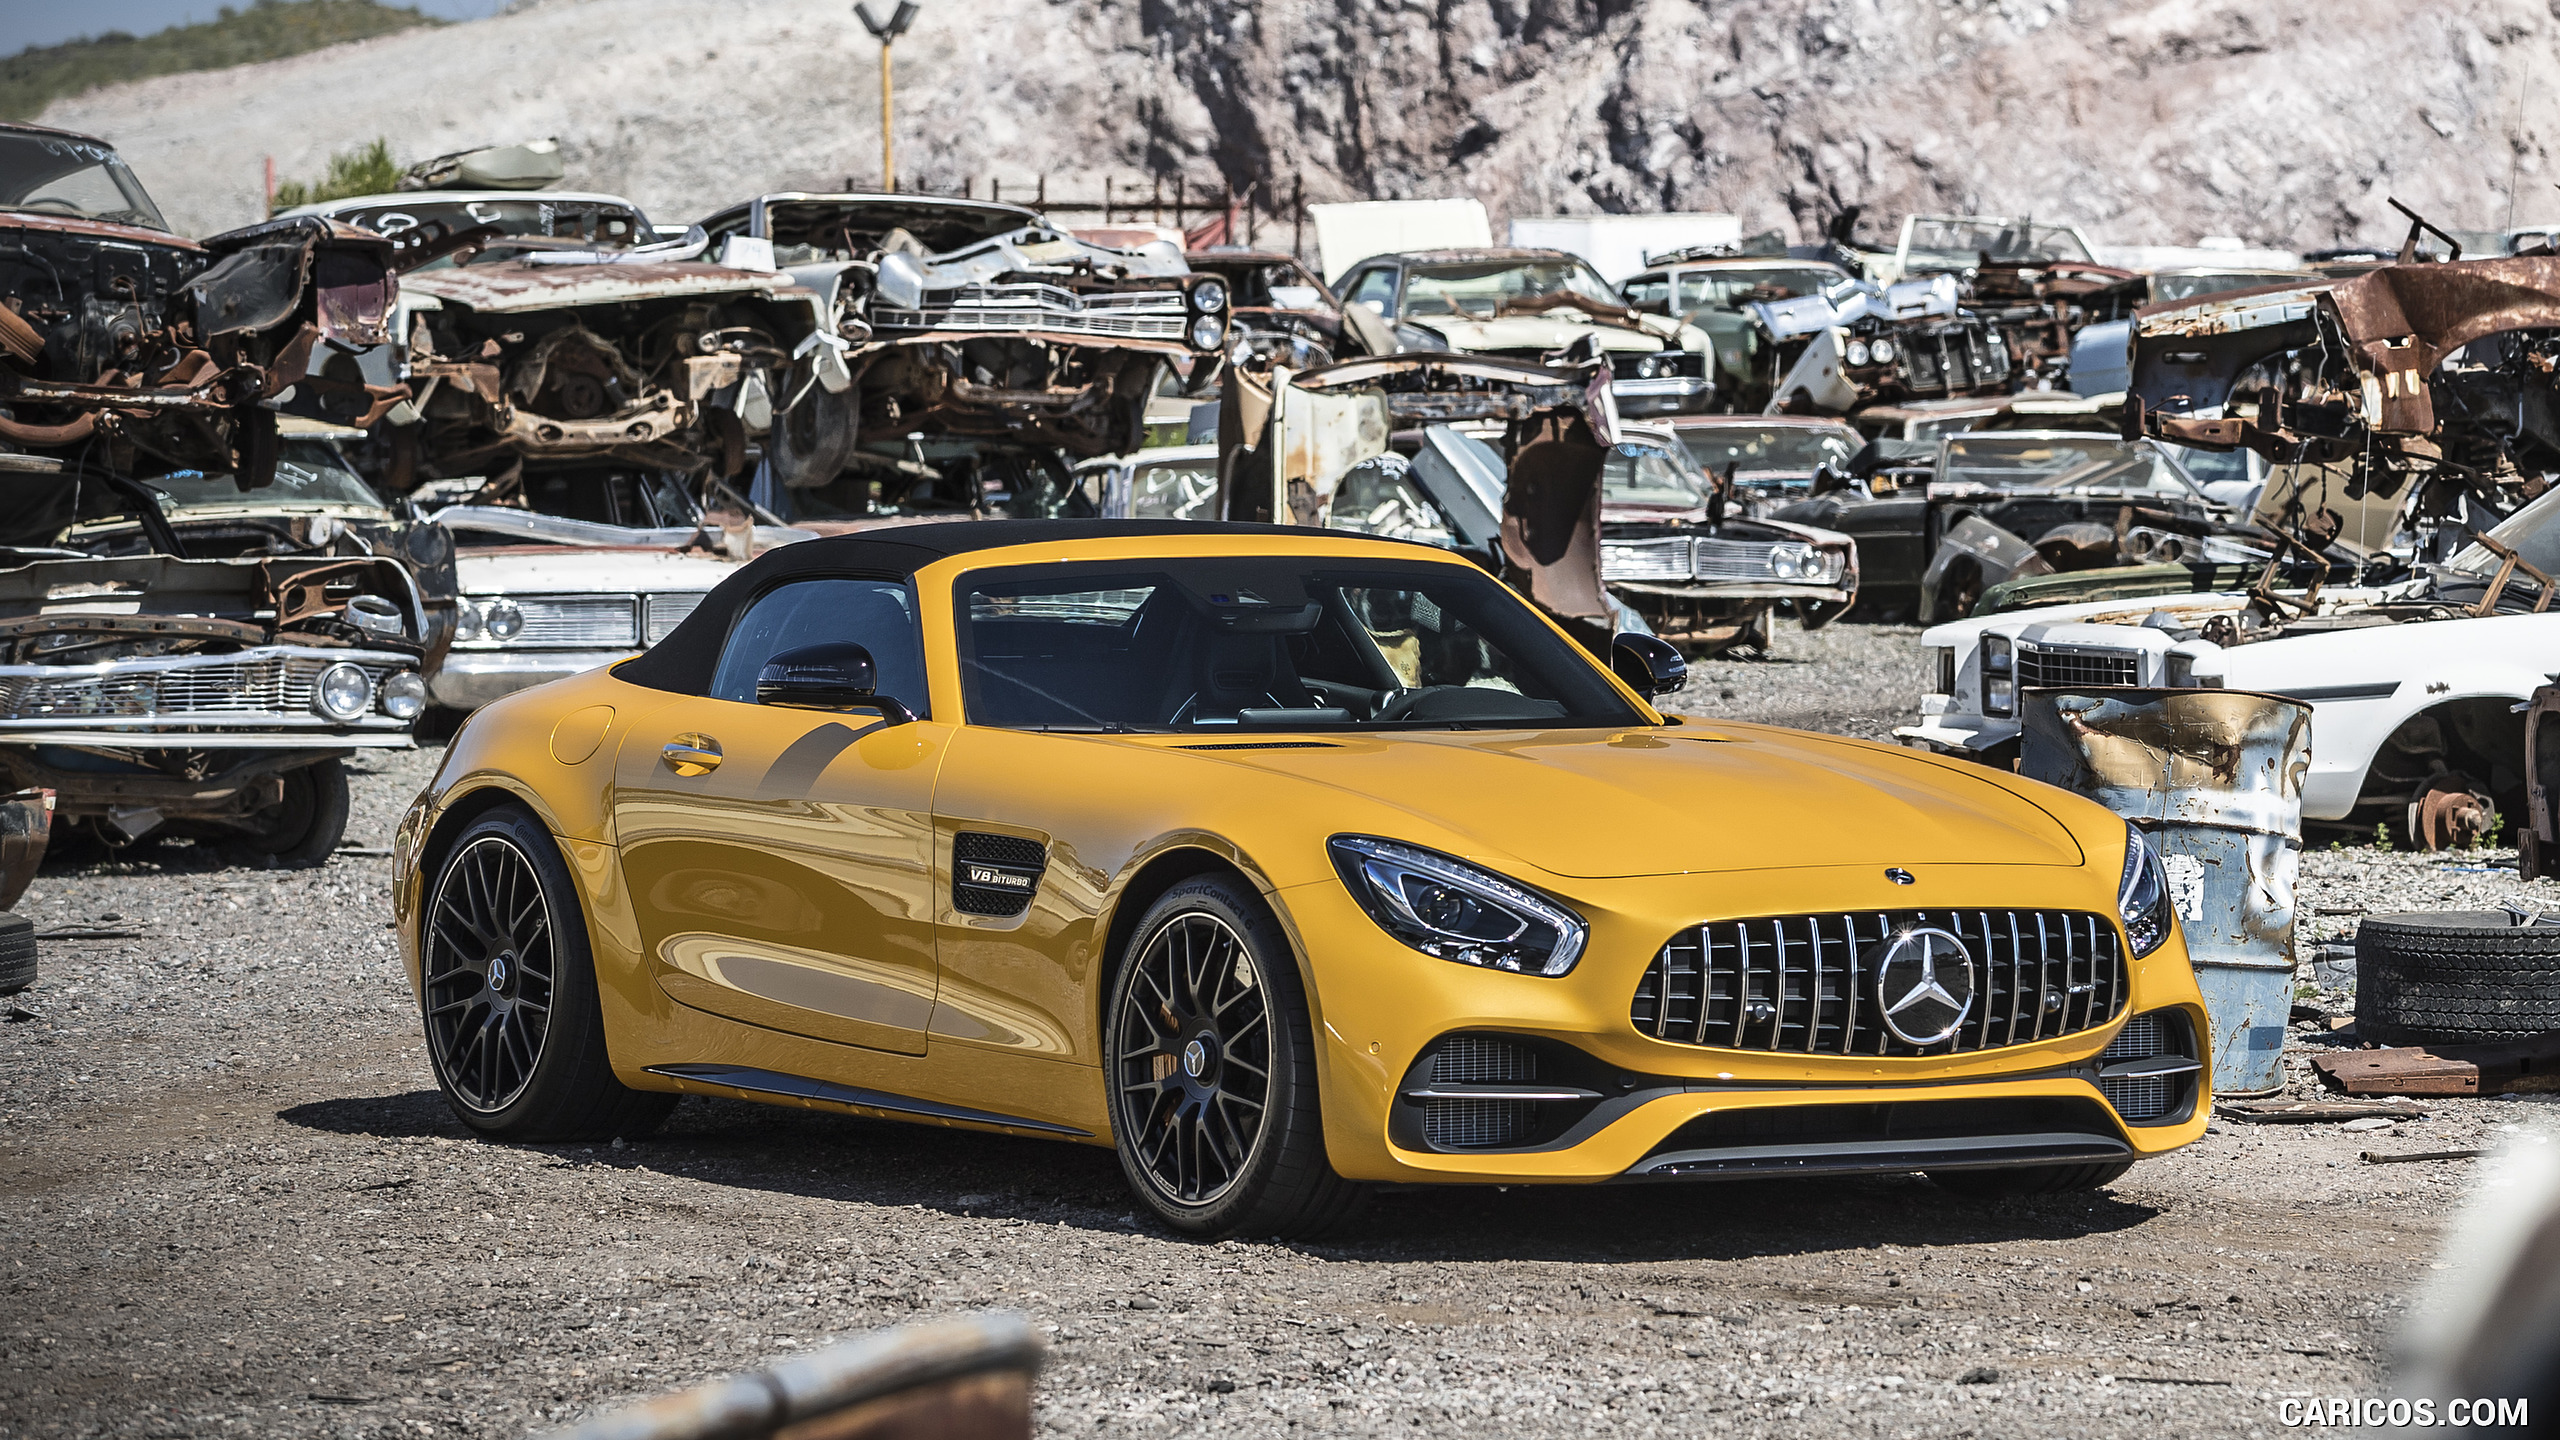 2018 Mercedes-AMG GT C Roadster - Front Three-Quarter, #213 of 350